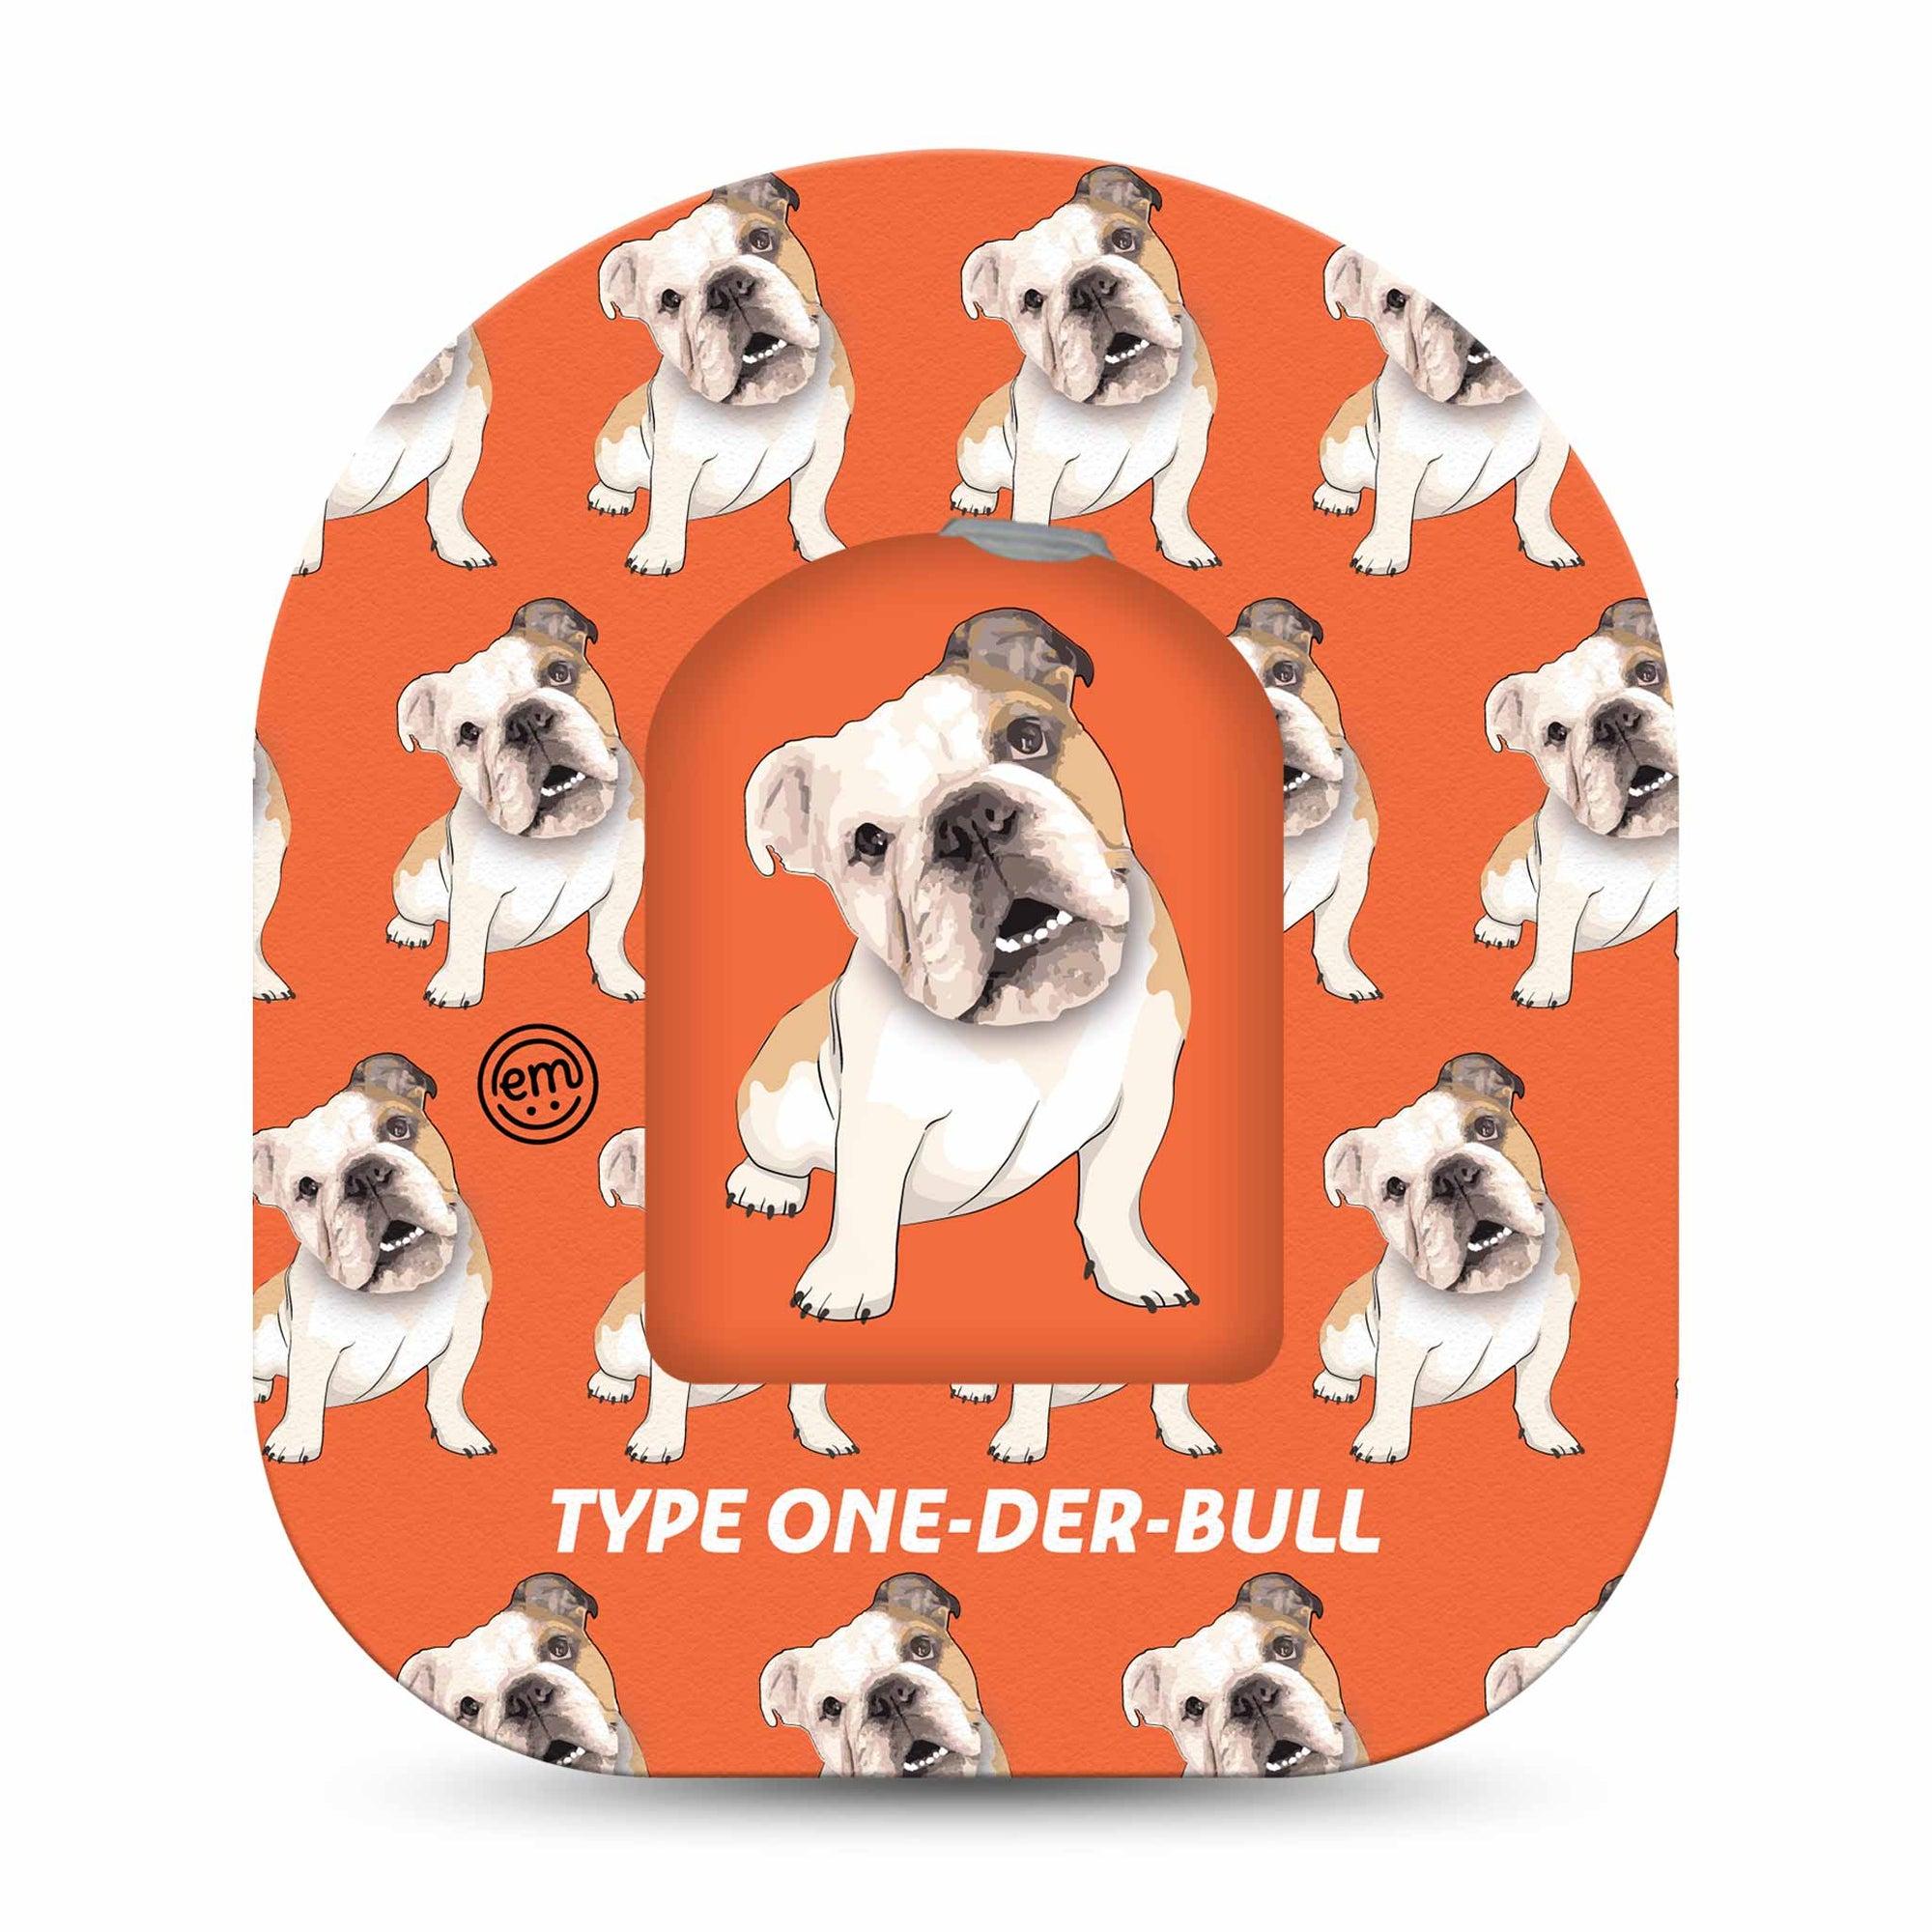 ExpressionMed Type-One-Der-Bul Omnipod Full Wrap Center Sticker and Mini Tape Pet Animal Inspired Vinyl Sticker and Tape Design Pump Design